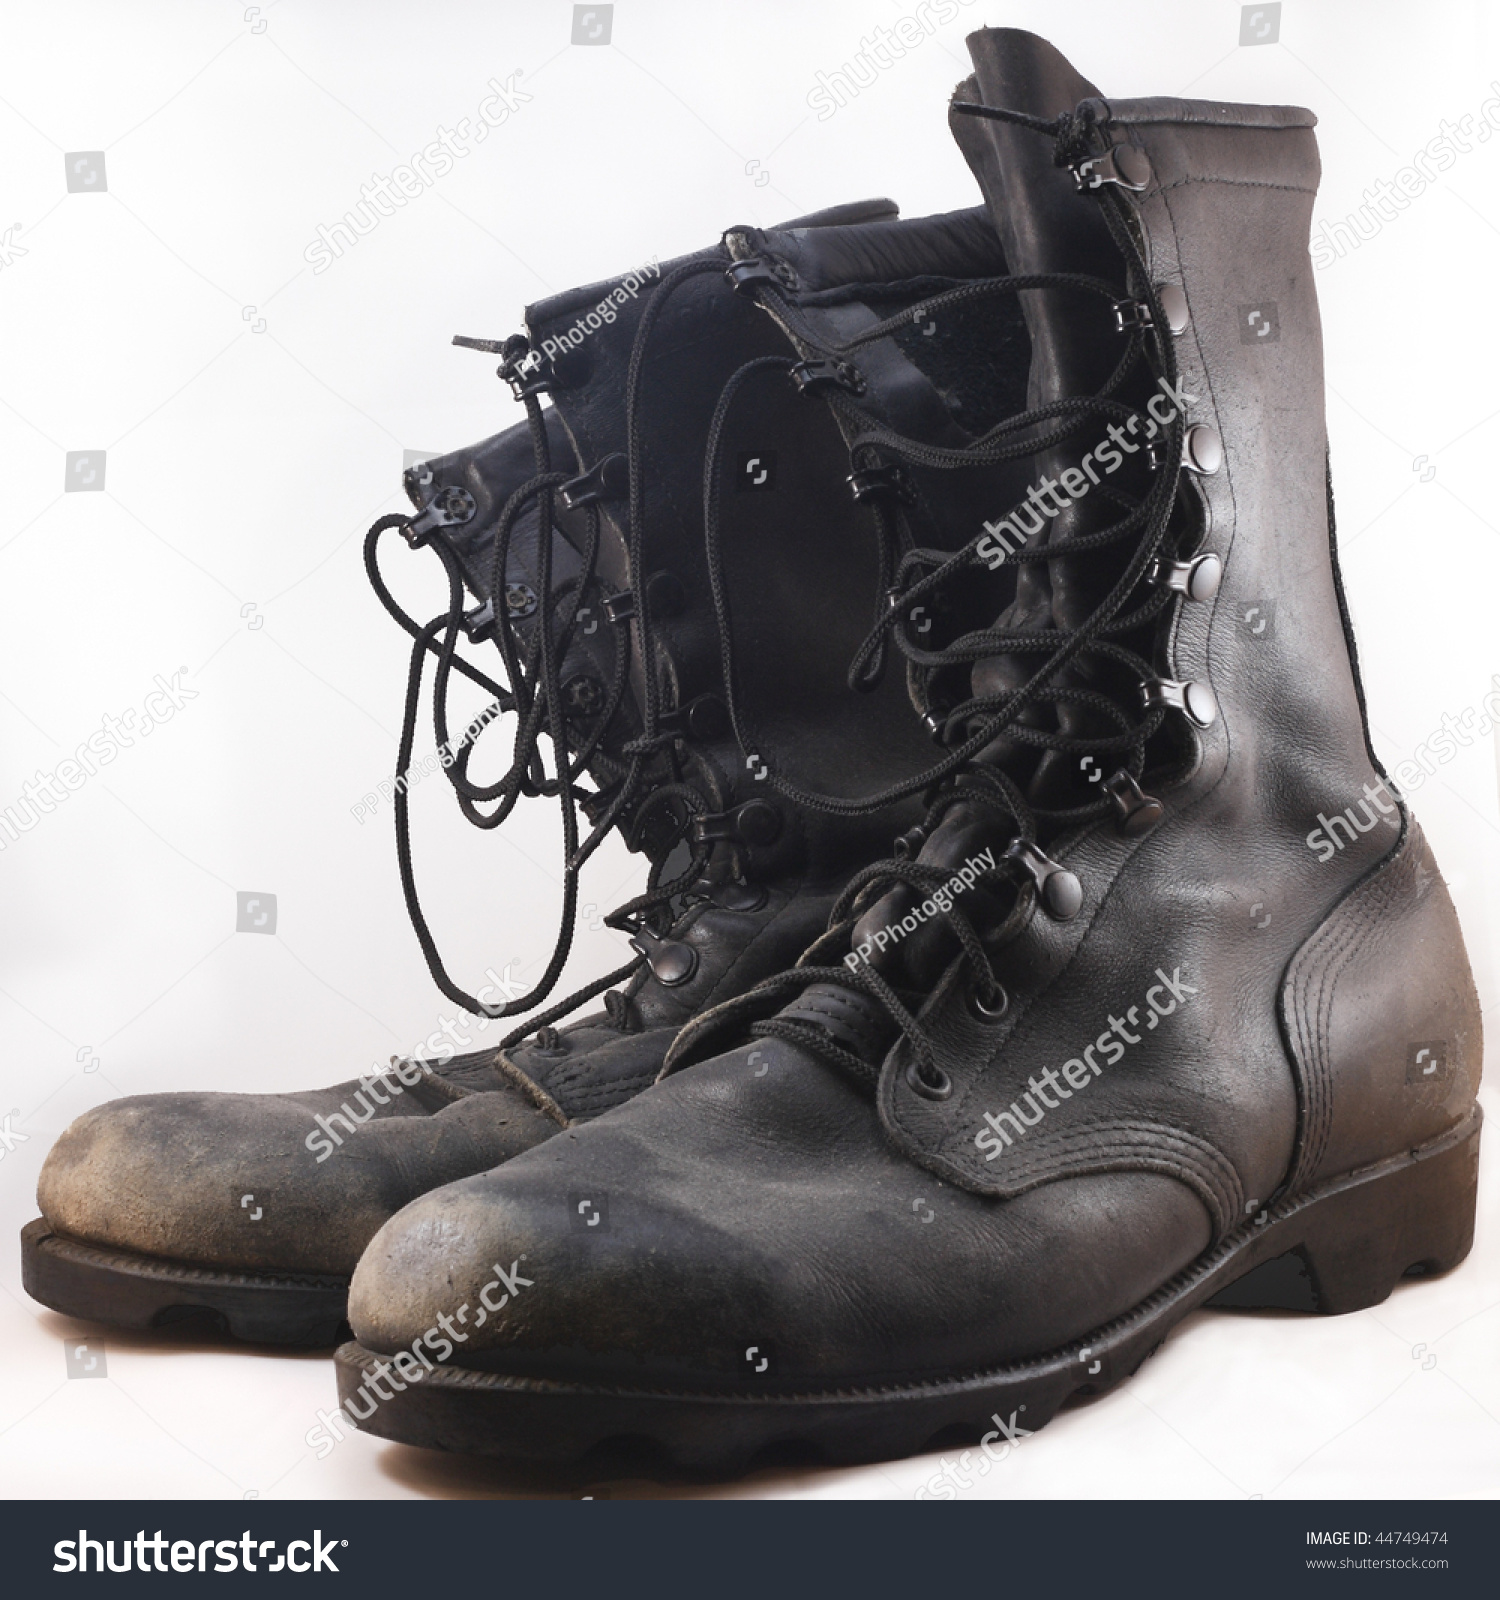 Military Leather Combat Boots On White Stock Photo 44749474 - Shutterstock